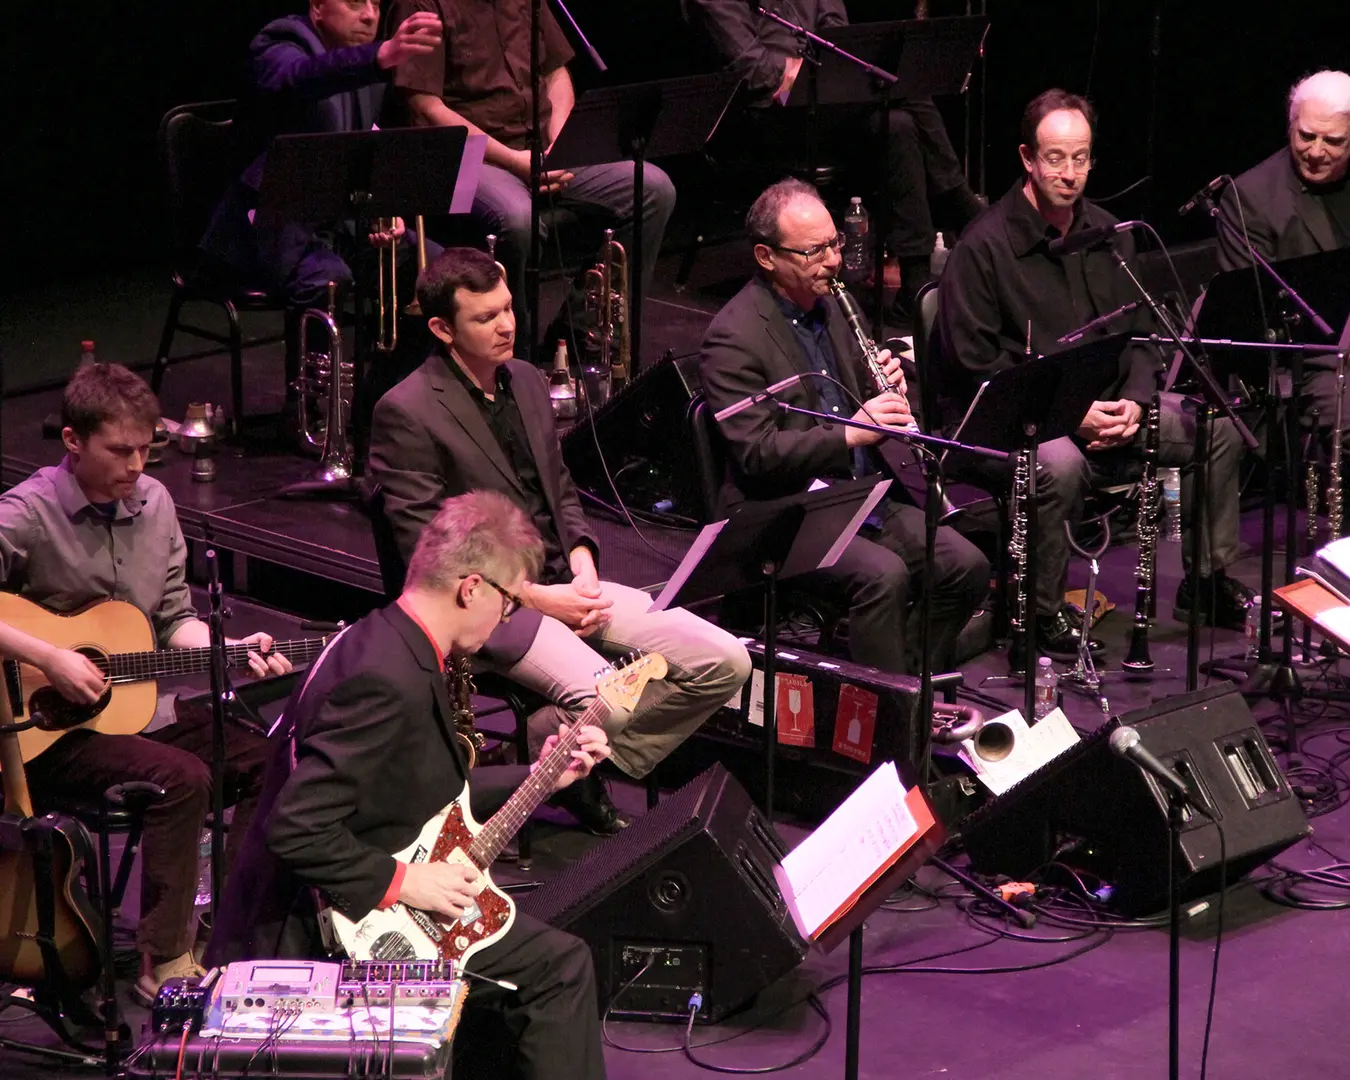 Nels Cline in performance at Royce Hall, Los Angeles. Photo by Phinn Sriployrung.